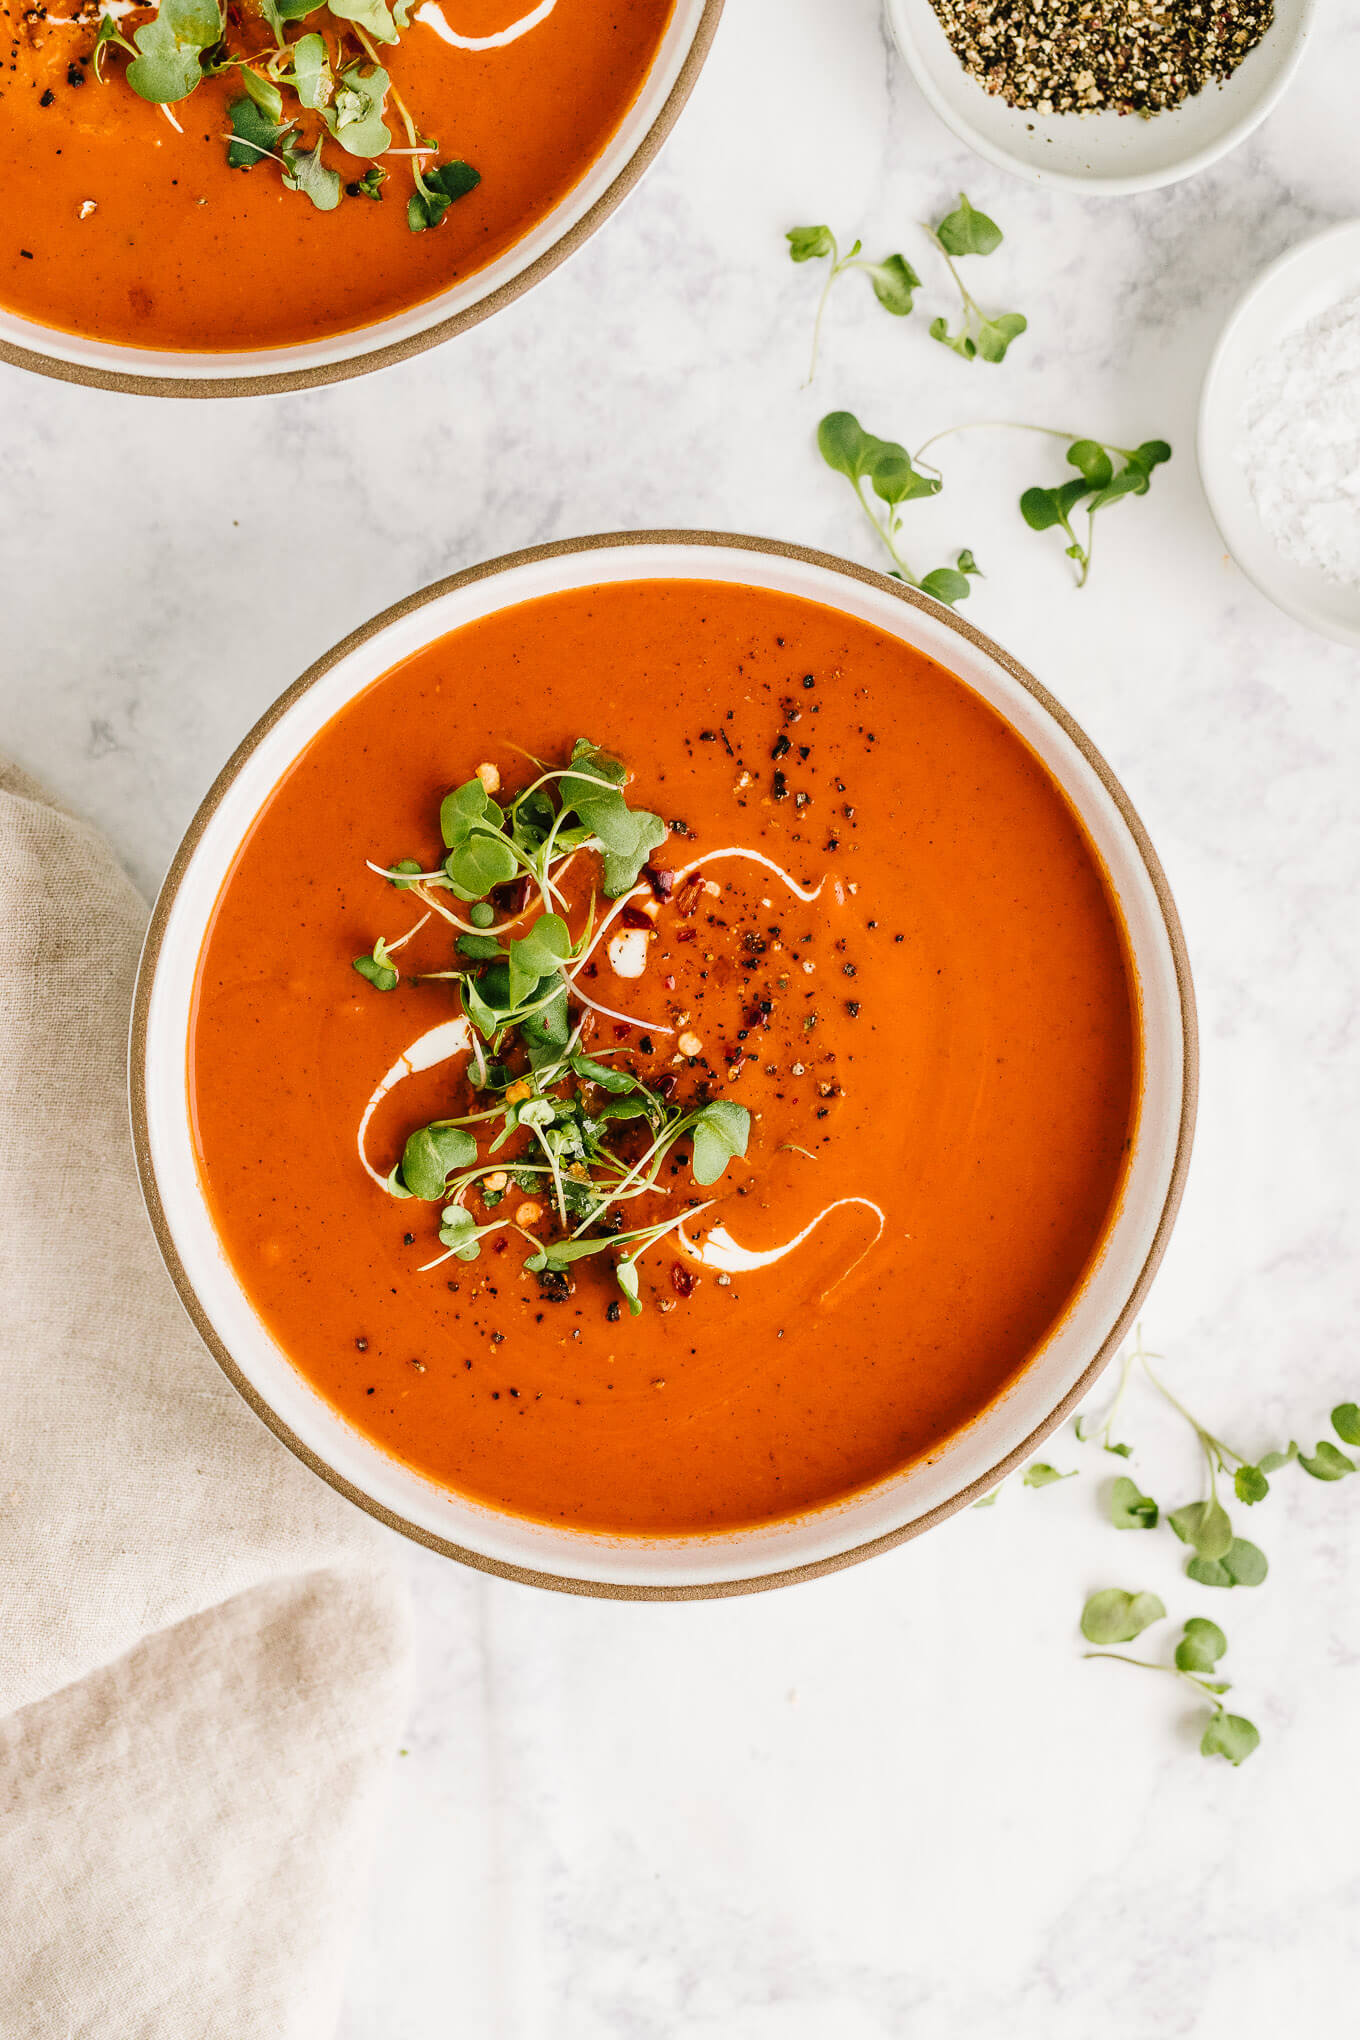 https://nourishedbynutrition.com/wp-content/uploads/2020/08/Roasted-Red-Pepper-Tomato-Soup-2.jpg